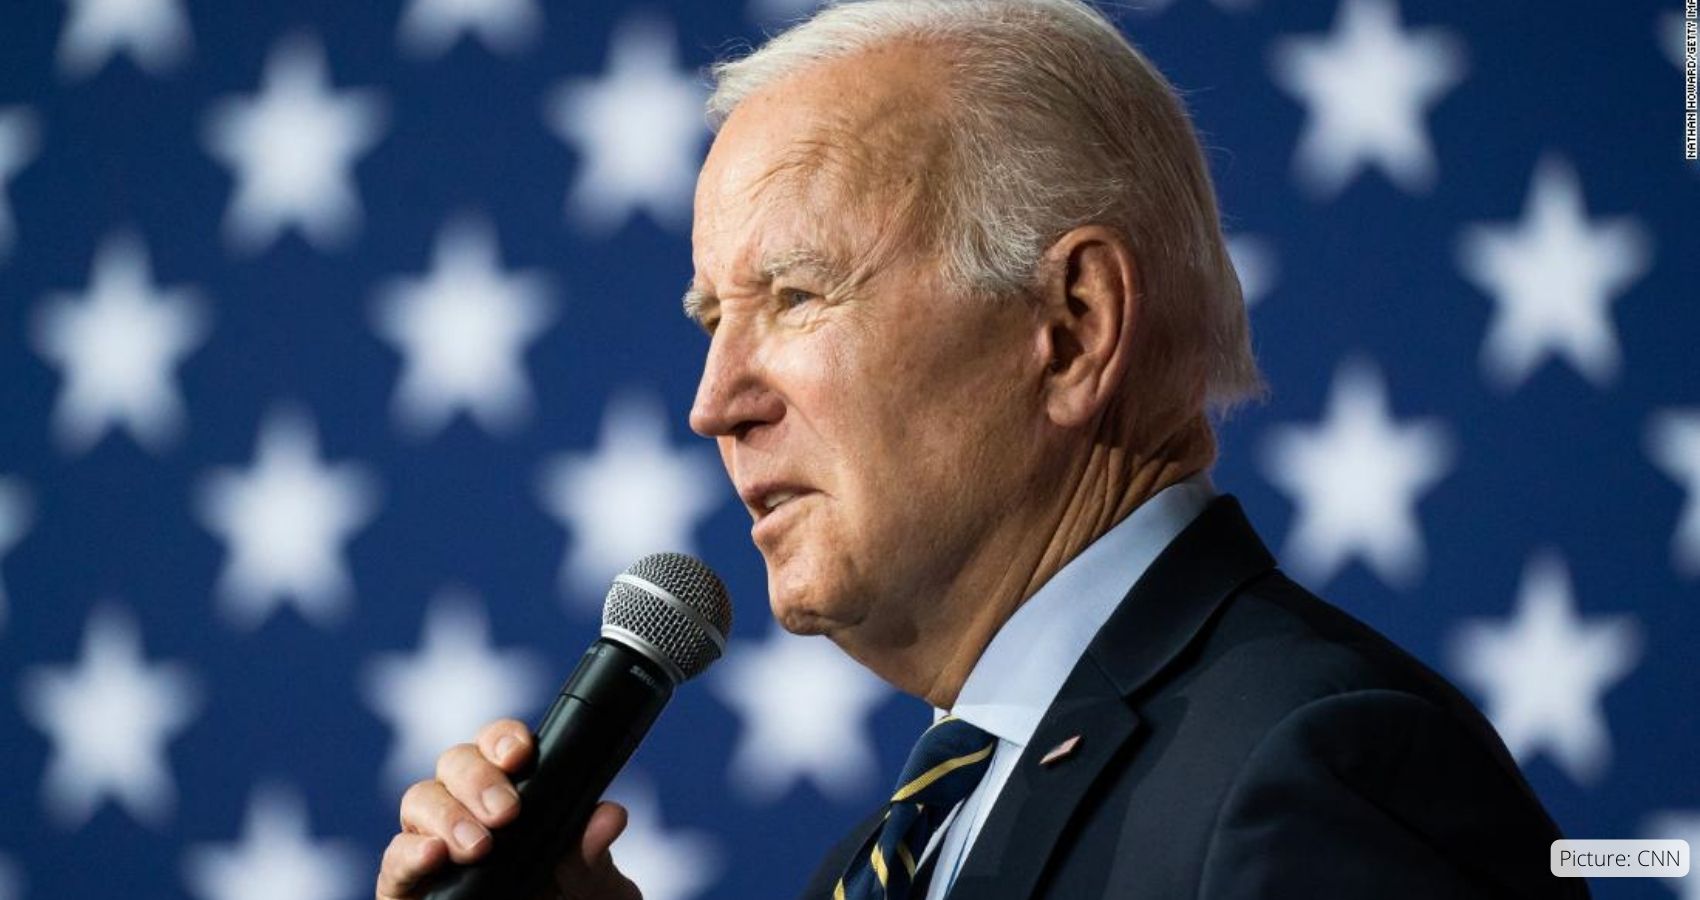 President Biden’s Reelection Prospects: A Year Out from 2024